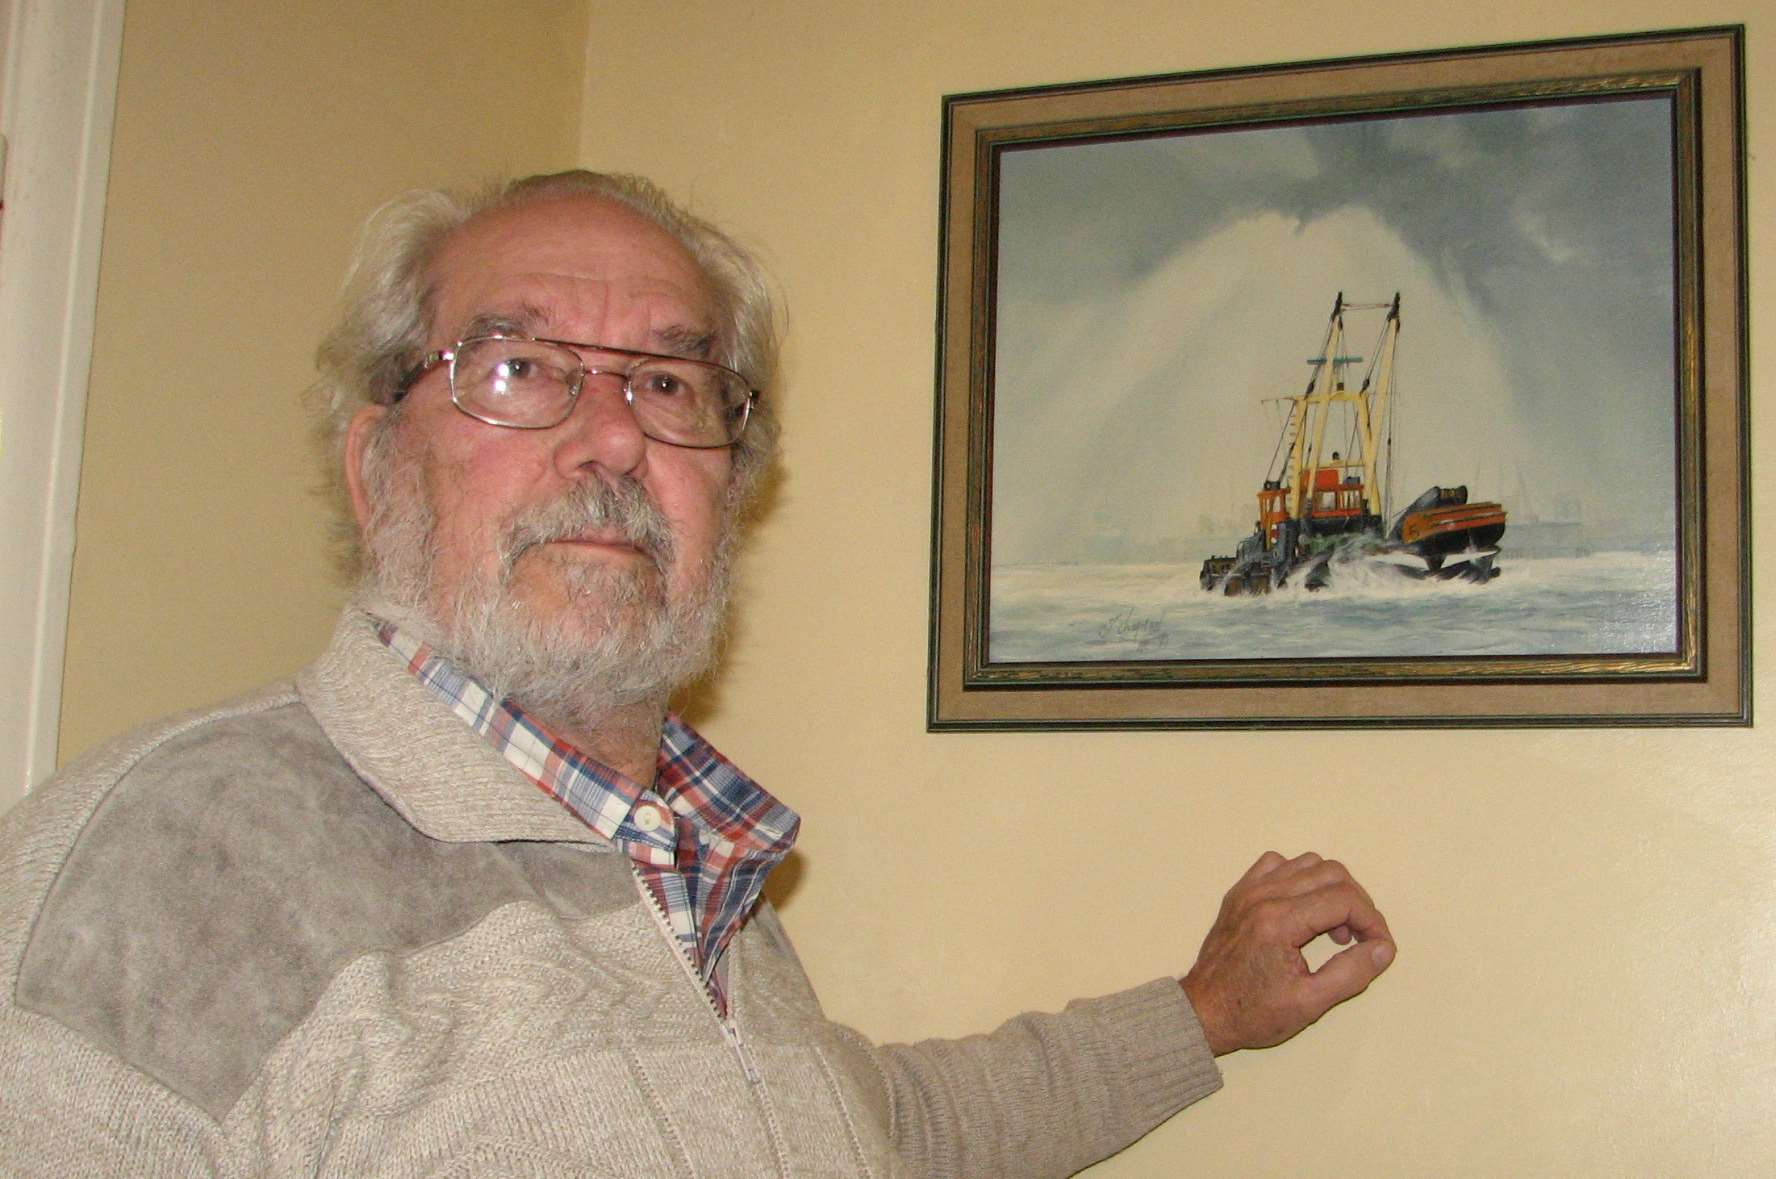 Derek Collins with a portrait of the Medway Rhino at his home